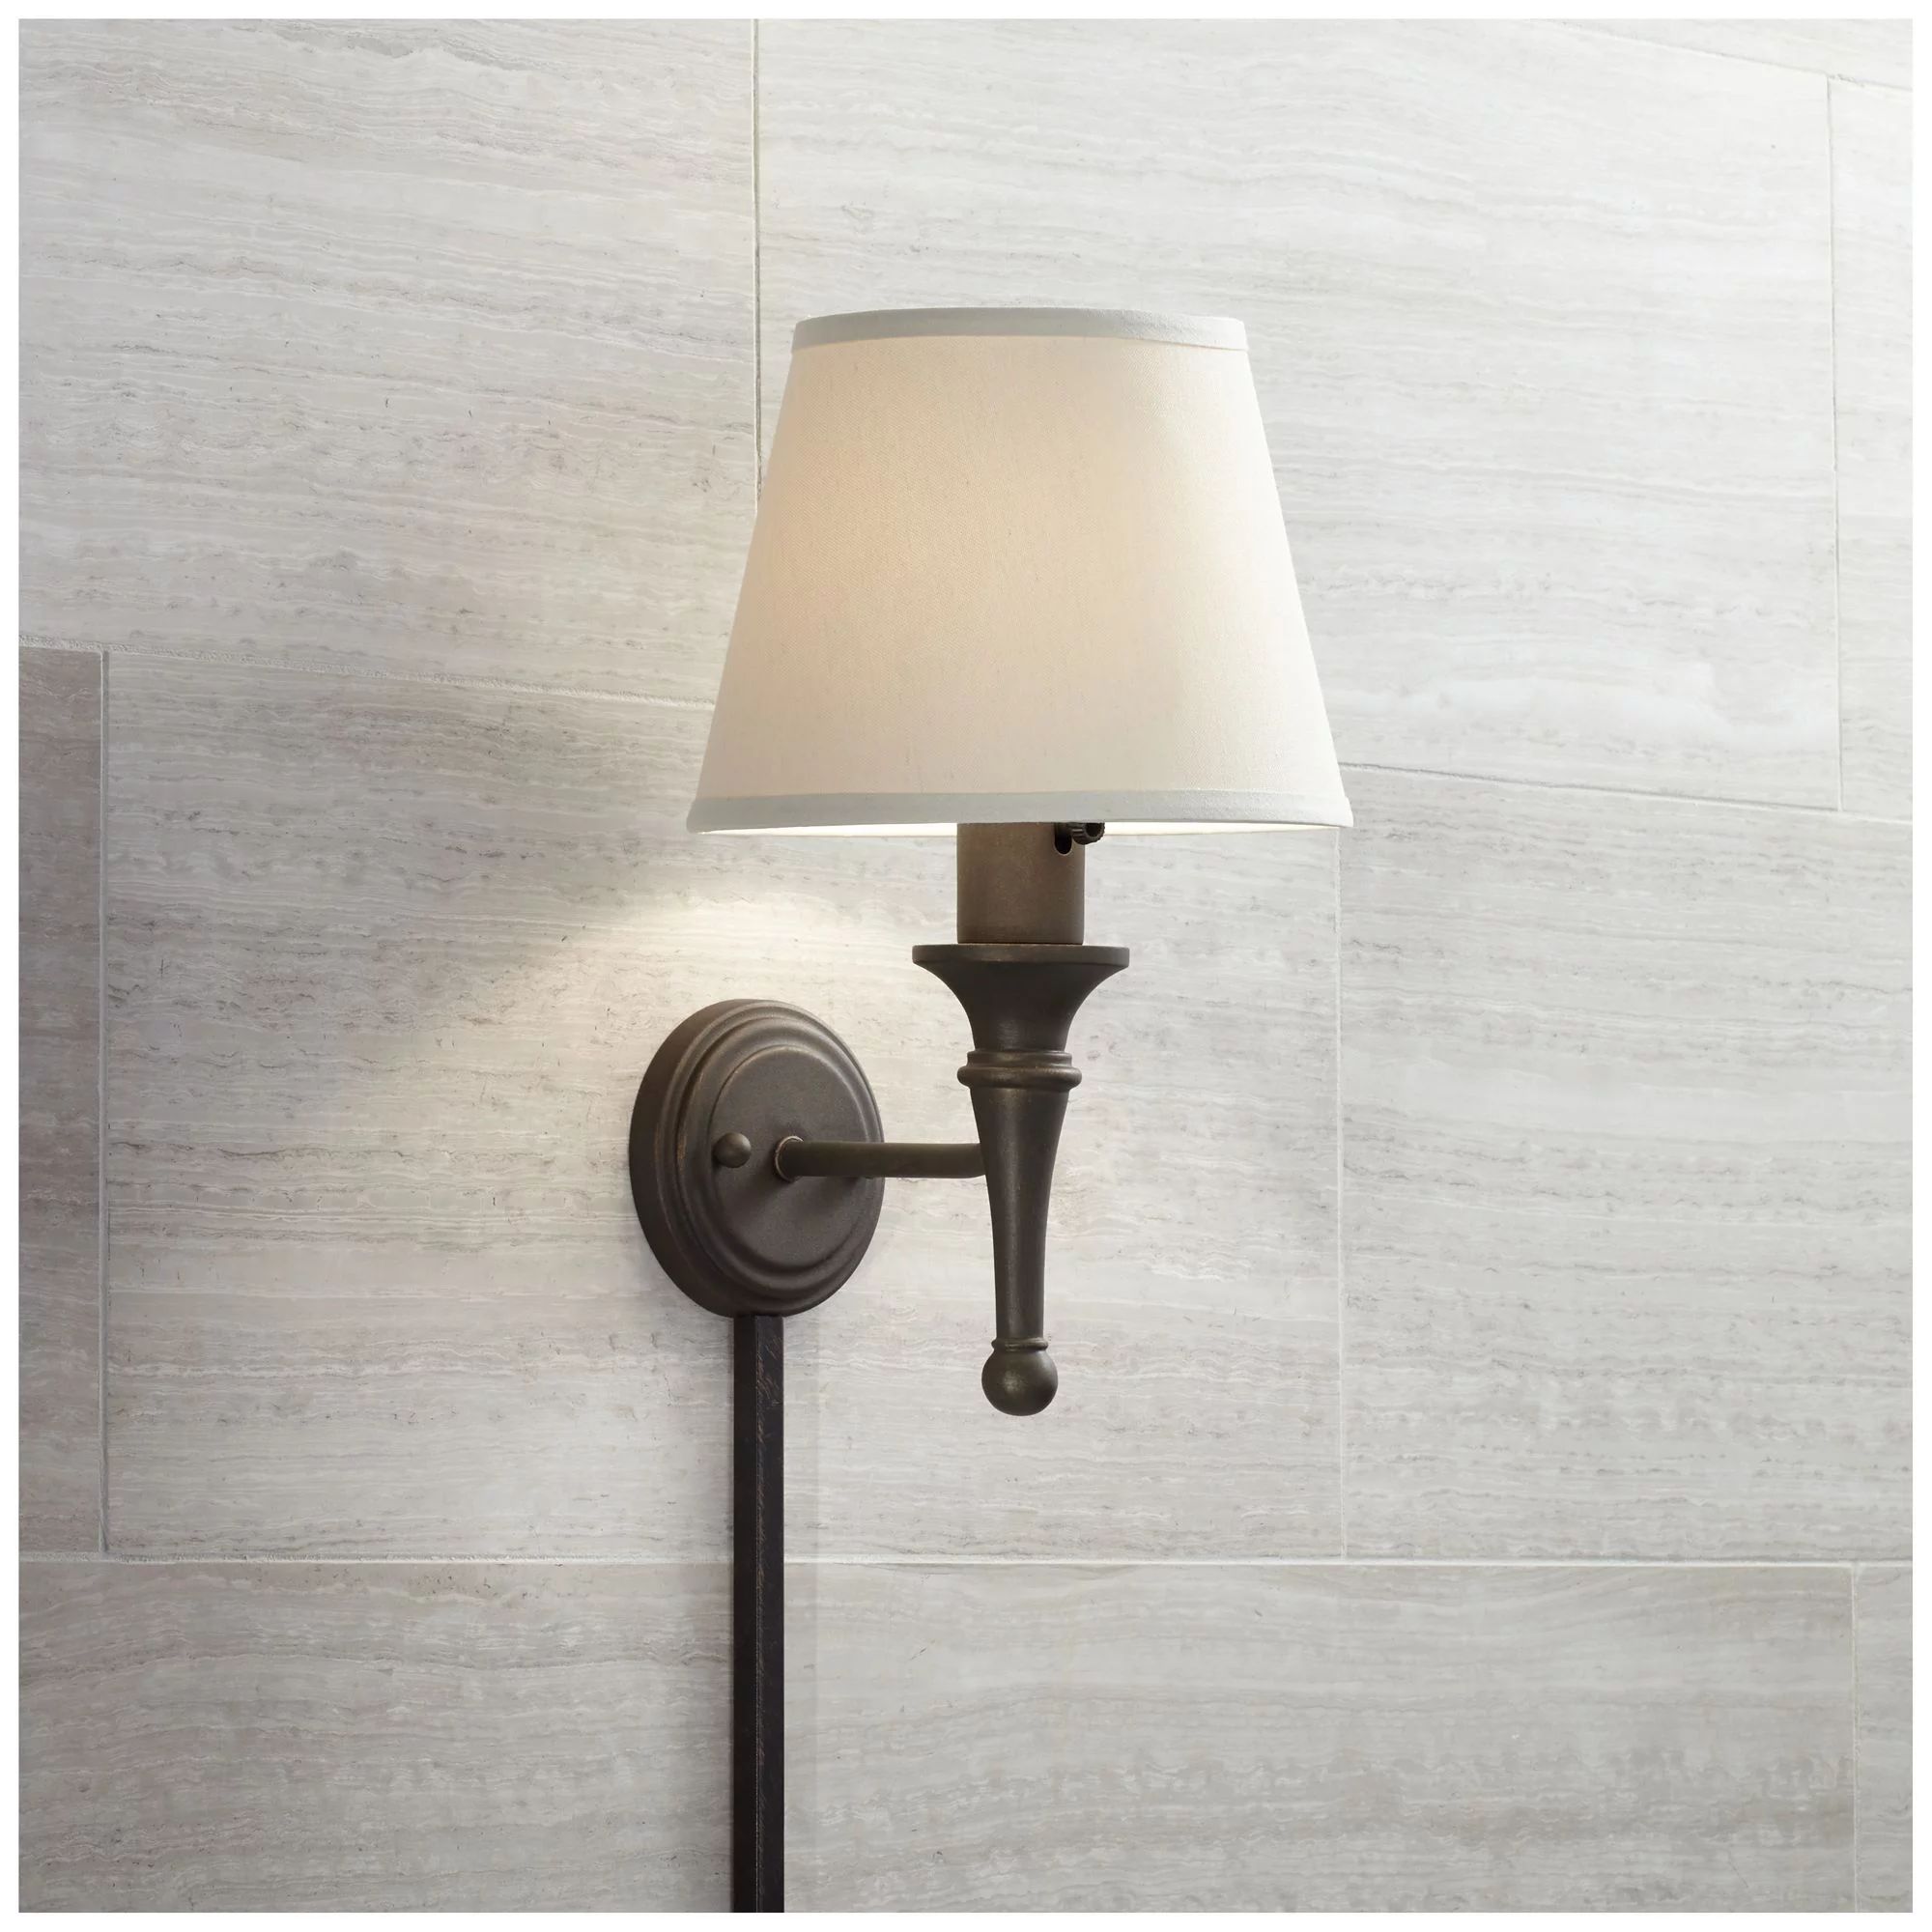 Regency Hill Farmhouse Wall Lamp with Cord Cover Bronze Plug-In Light Fixture Ivory Cotton Empire... | Walmart (US)